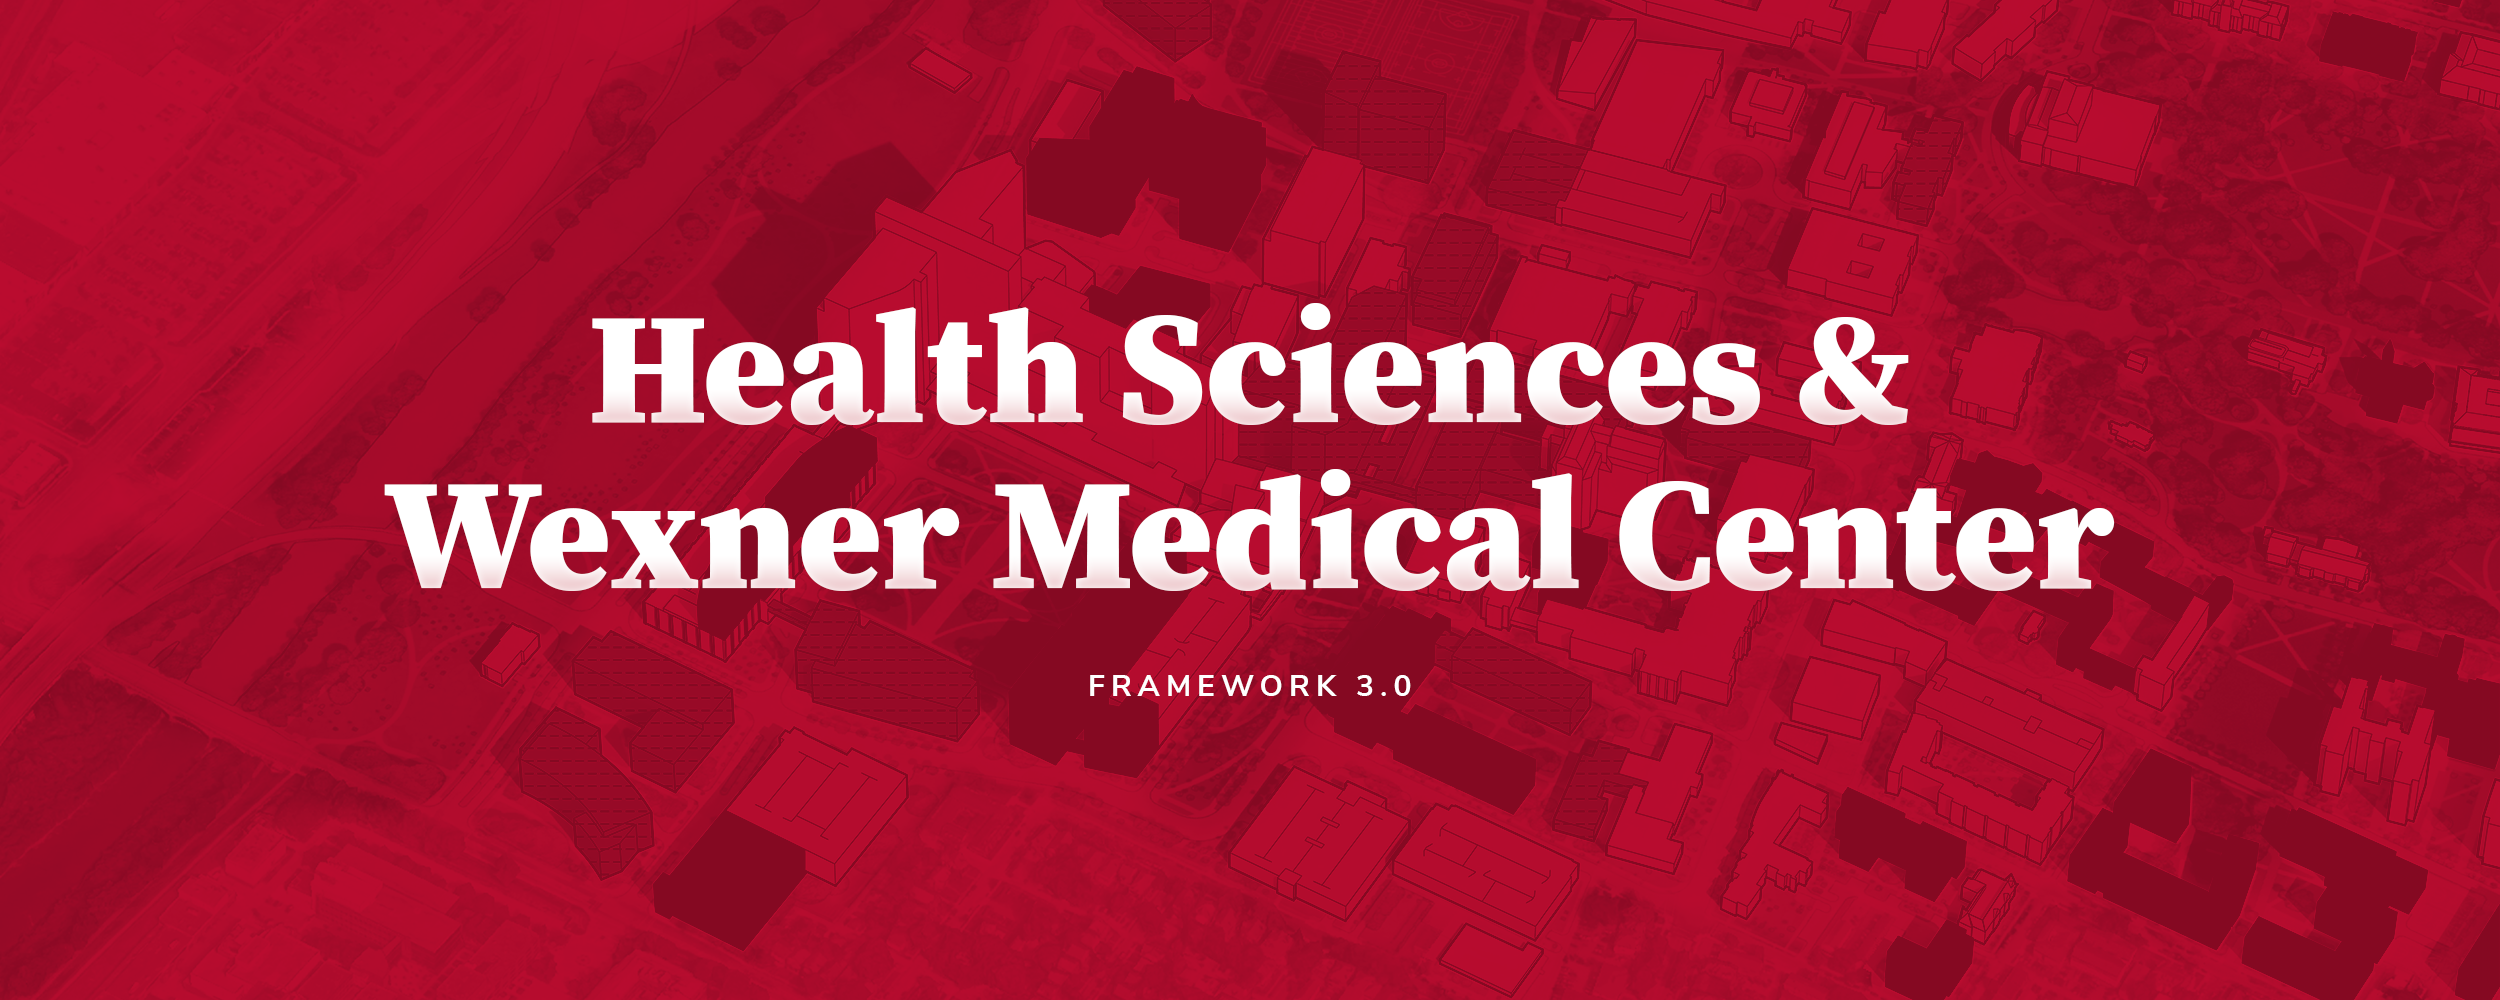 Web banner with text "Health Sciences and Wexner Medical Center"